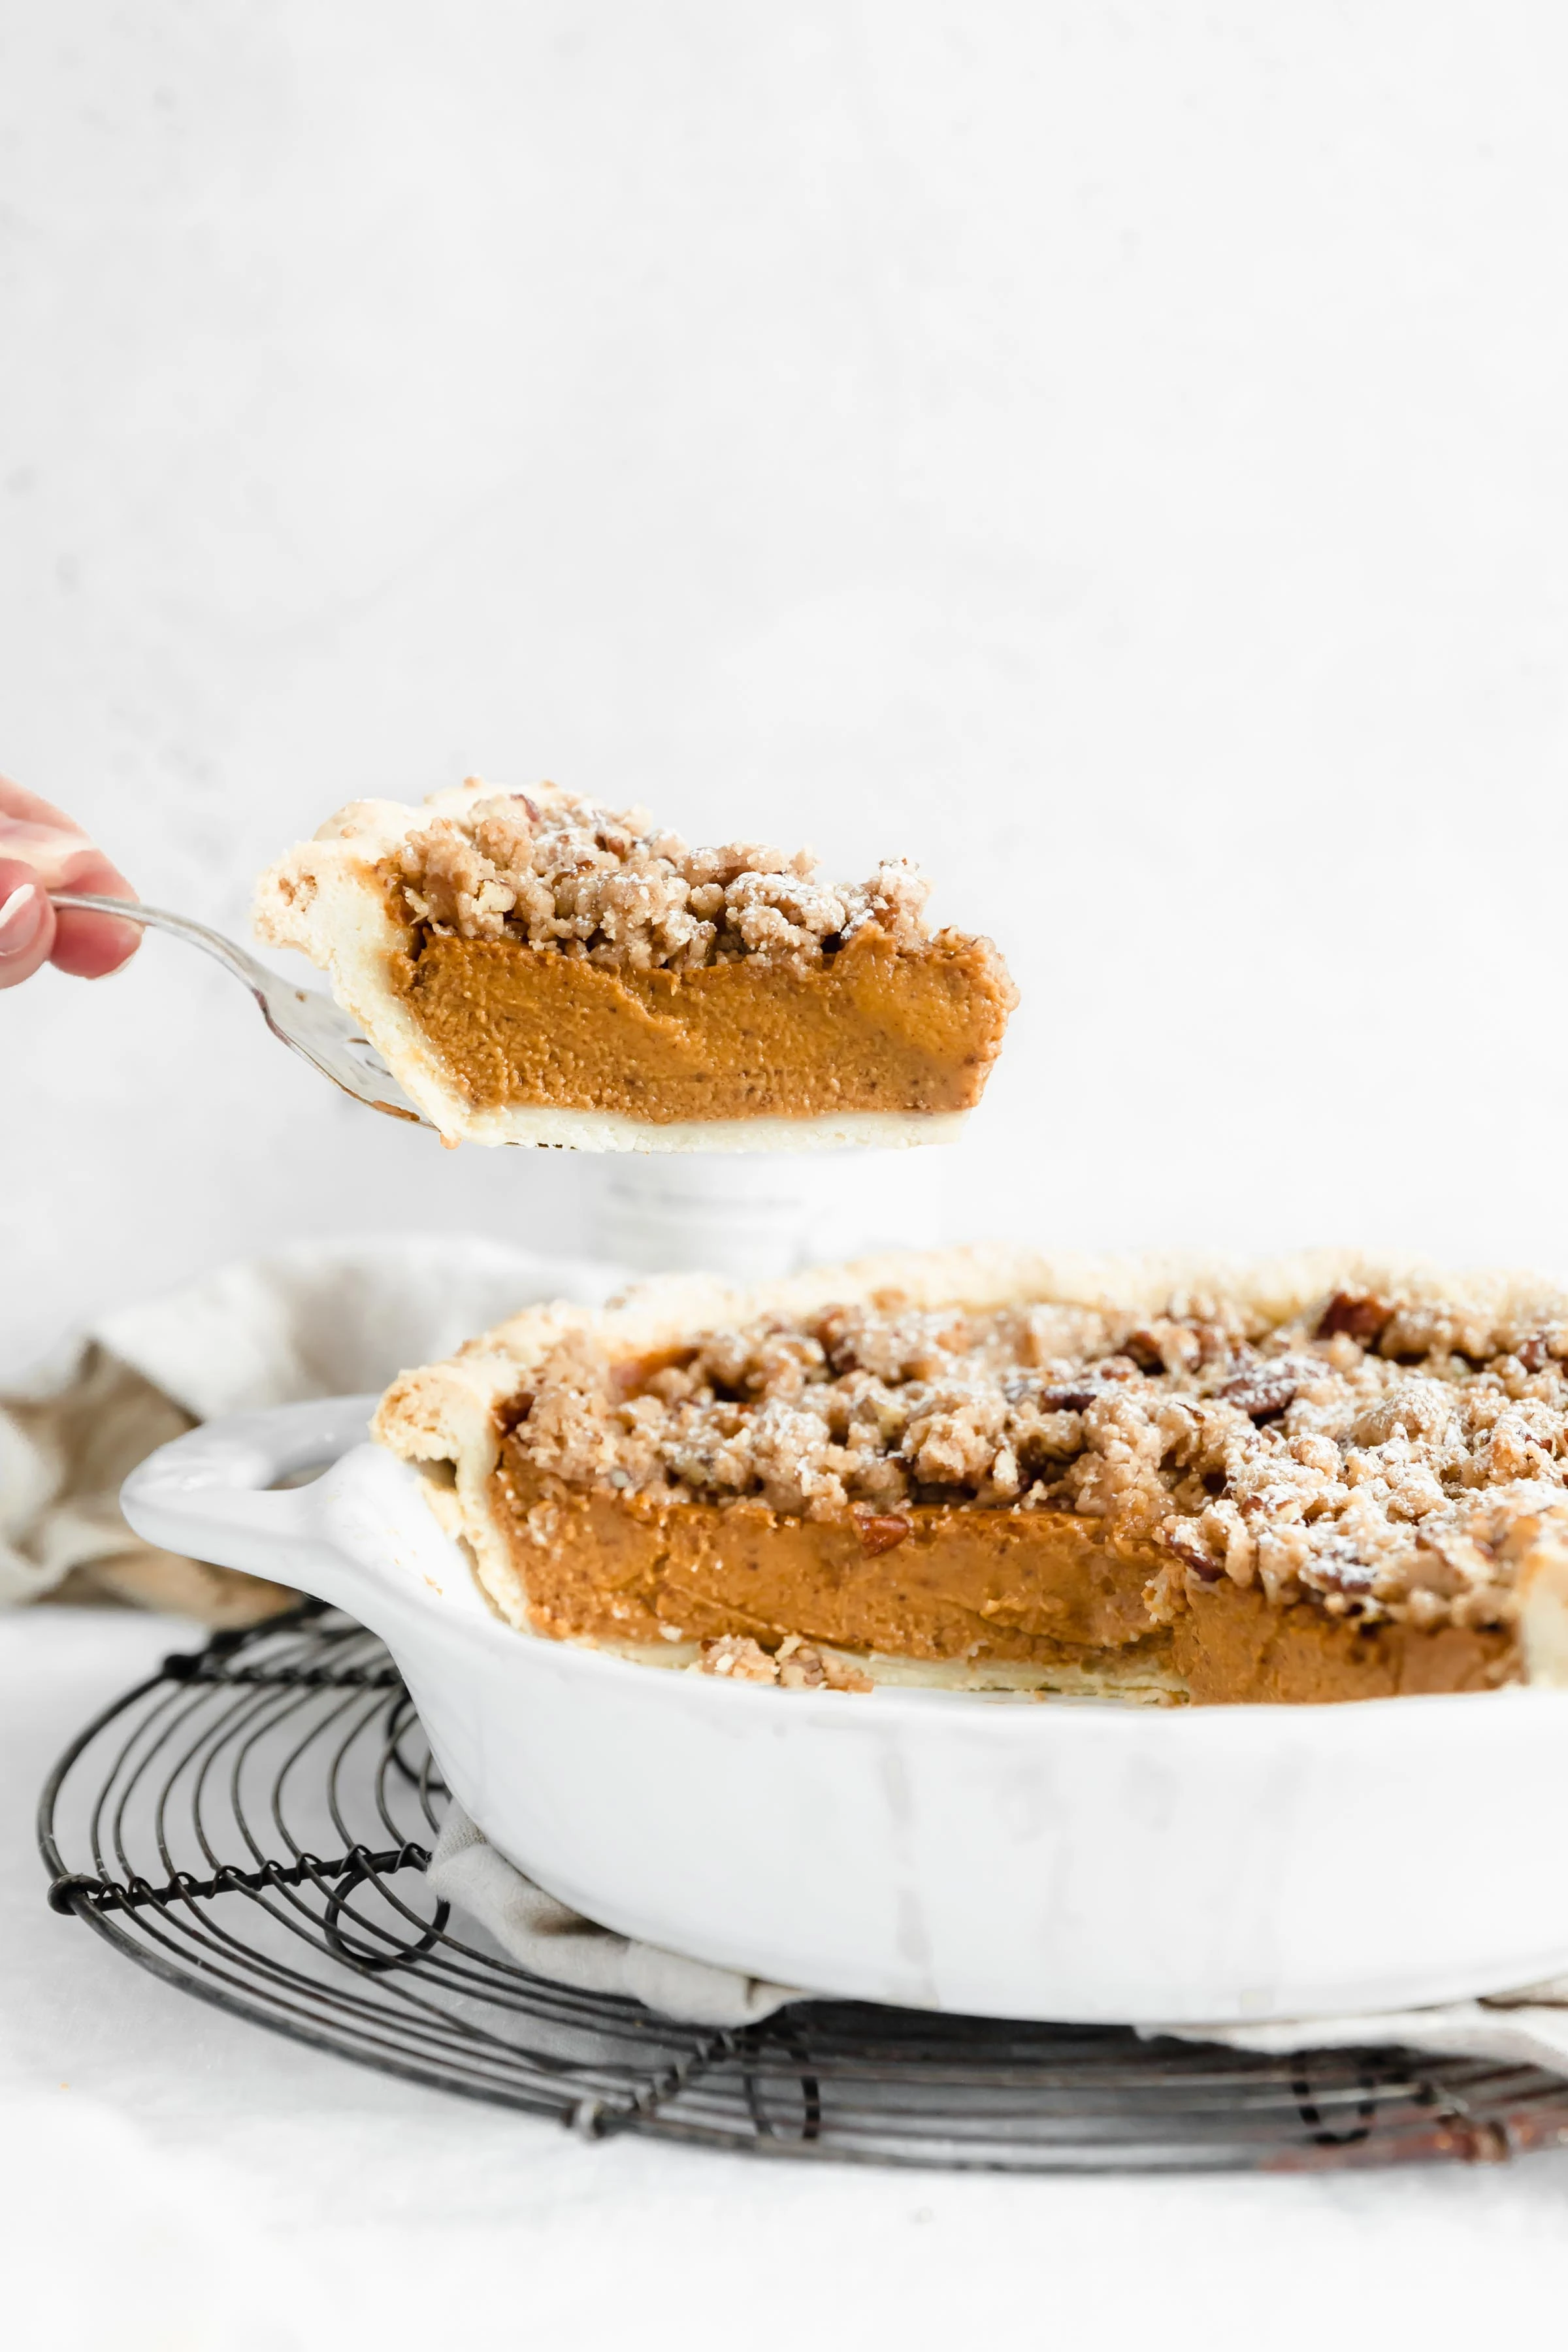 This perfectly spiced sweet potato pie with a decadent, buttery almond streusel. The perfect addition to your pie table this Thanksgiving!